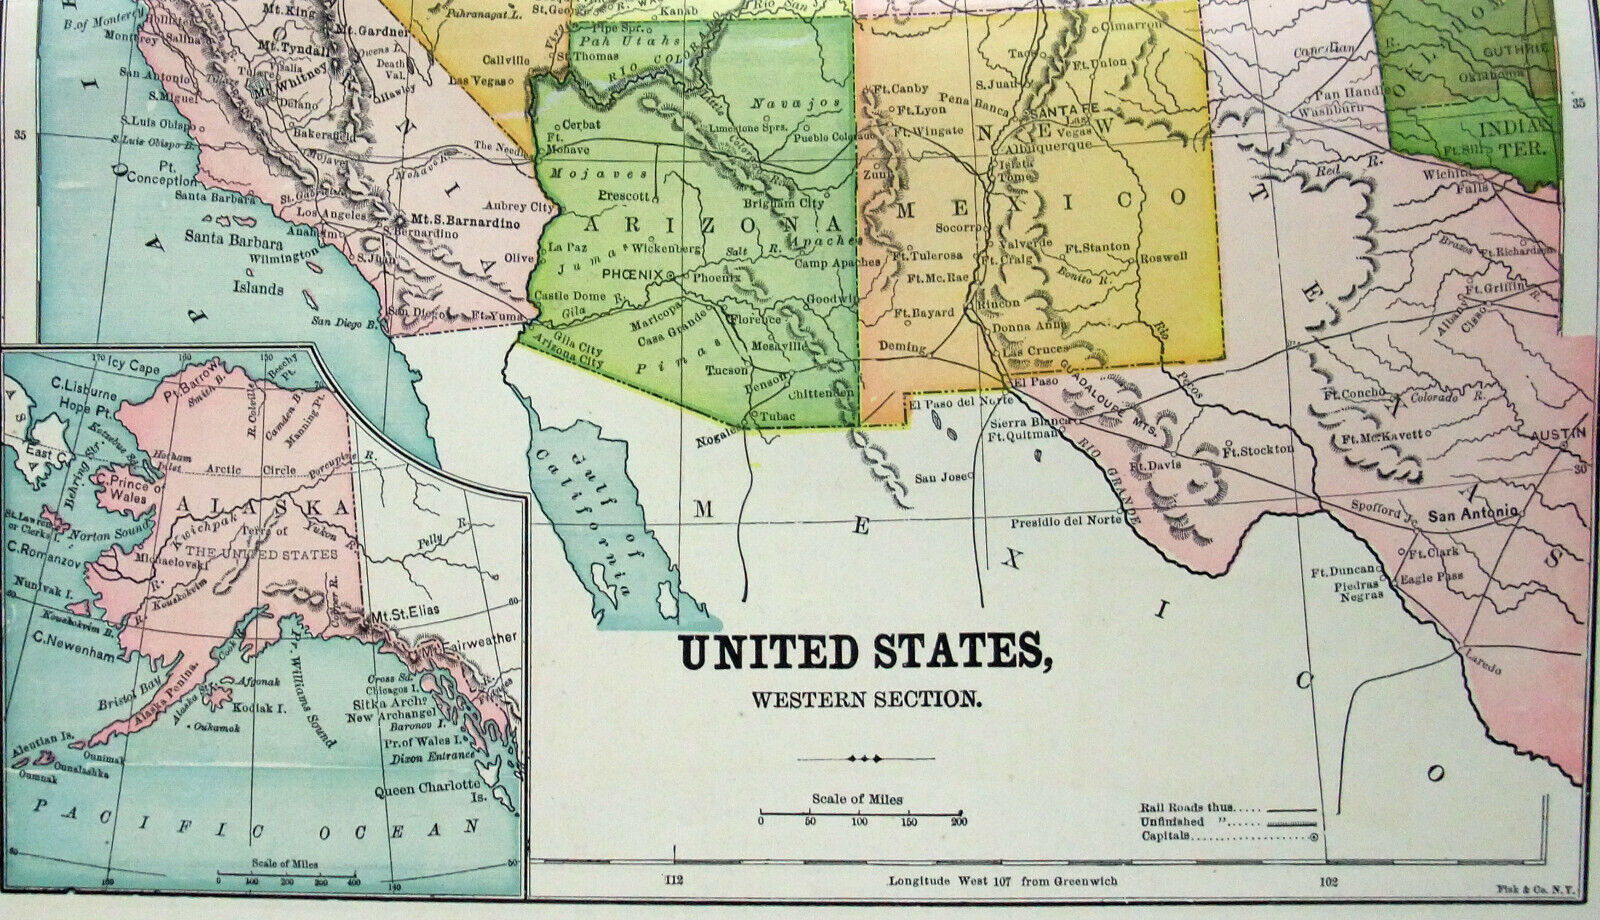 Western United States - Original 1891 Map by Hunt & Eaton. Antique